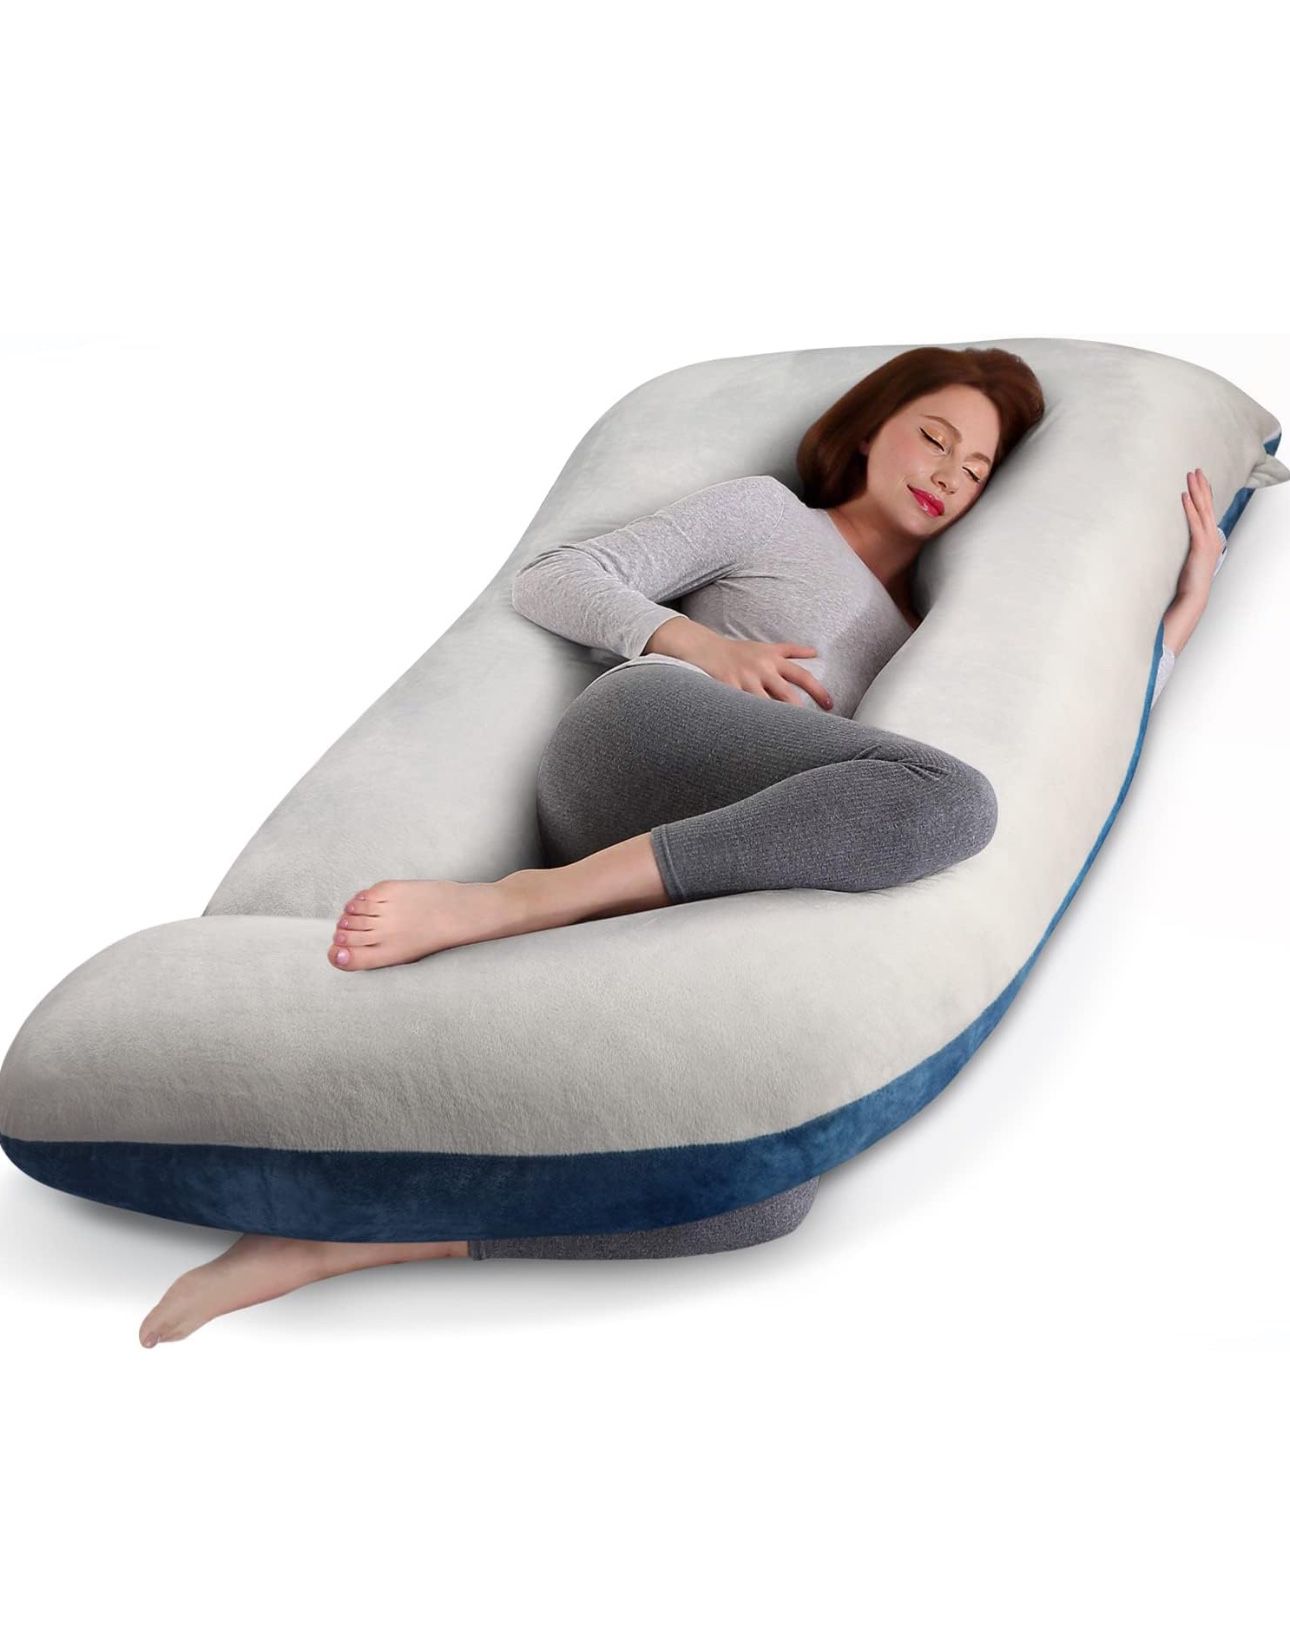 cauzyart Pregnancy Maternity Pillows for Sleeping 55 Inches U-Shape Full Body Pillow Support - for Back, Hips, Legs, Belly for Pregnant Women with Rem